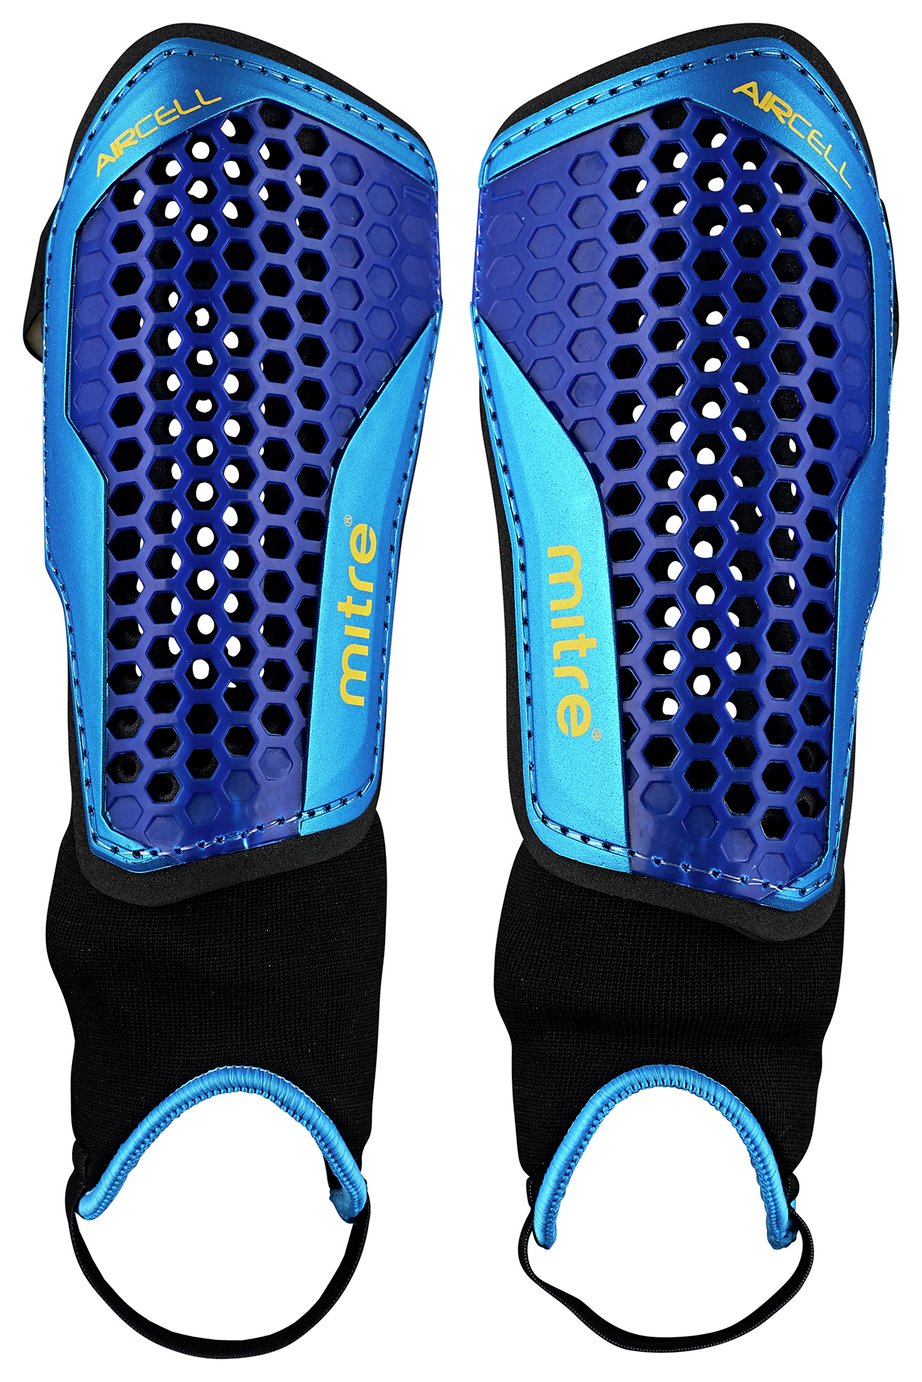 Mitre Aircell Carbon Shin Pads - Large